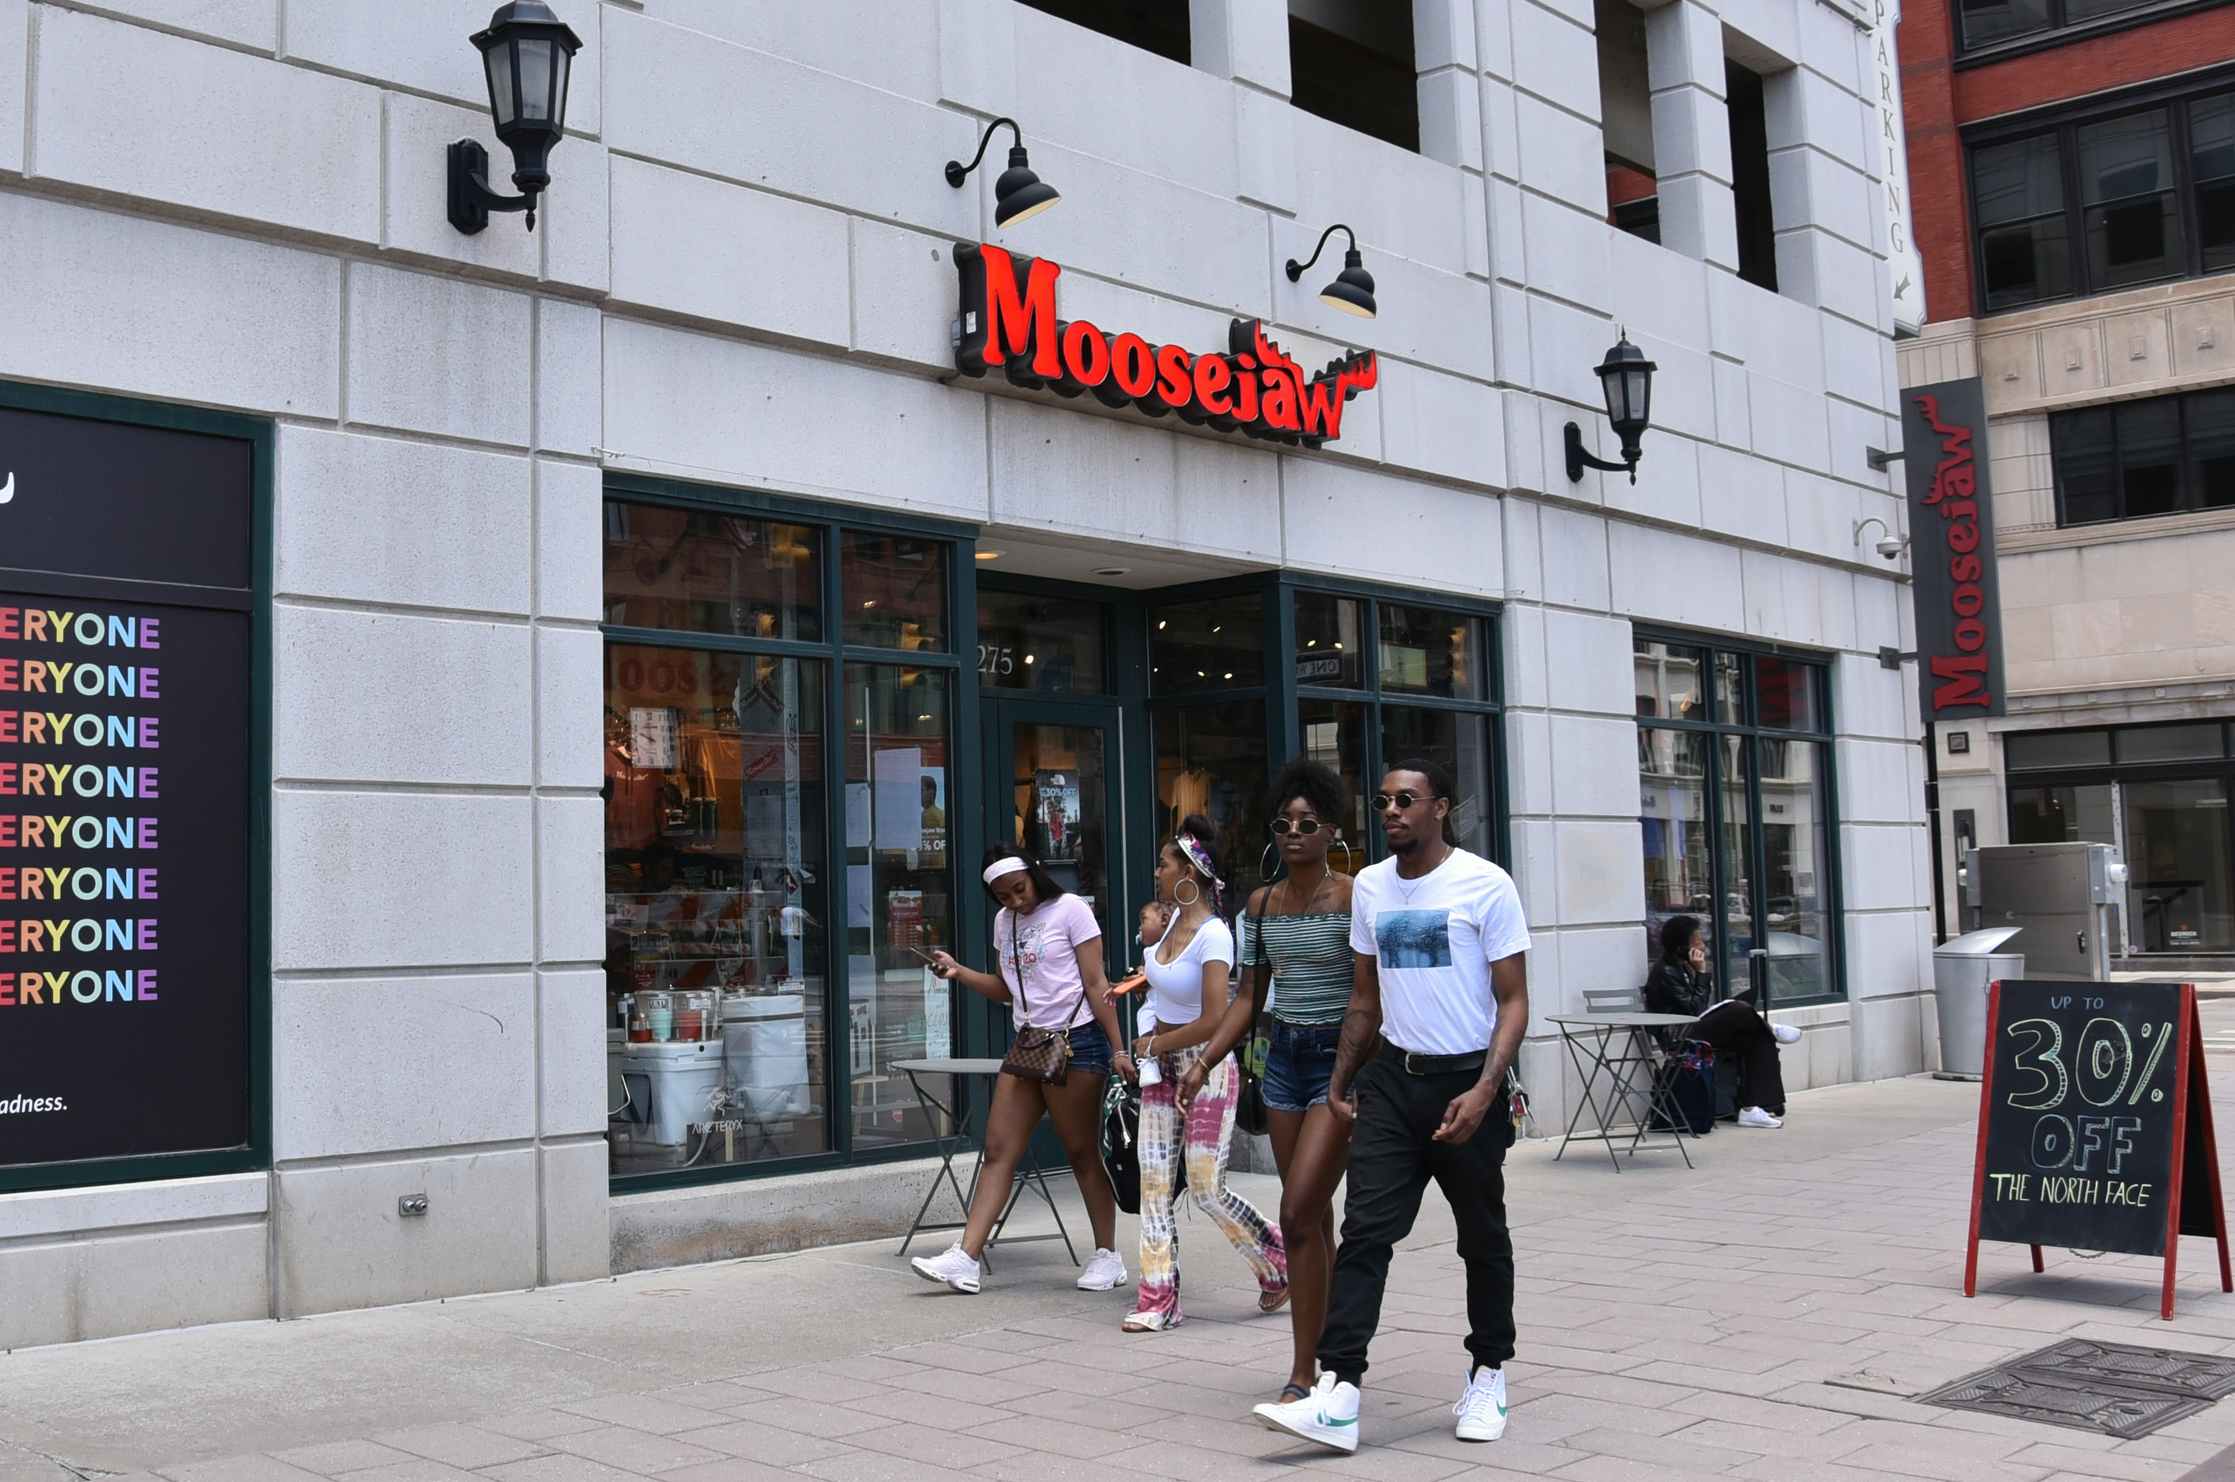 people walking by a moosejaw storefront in the city